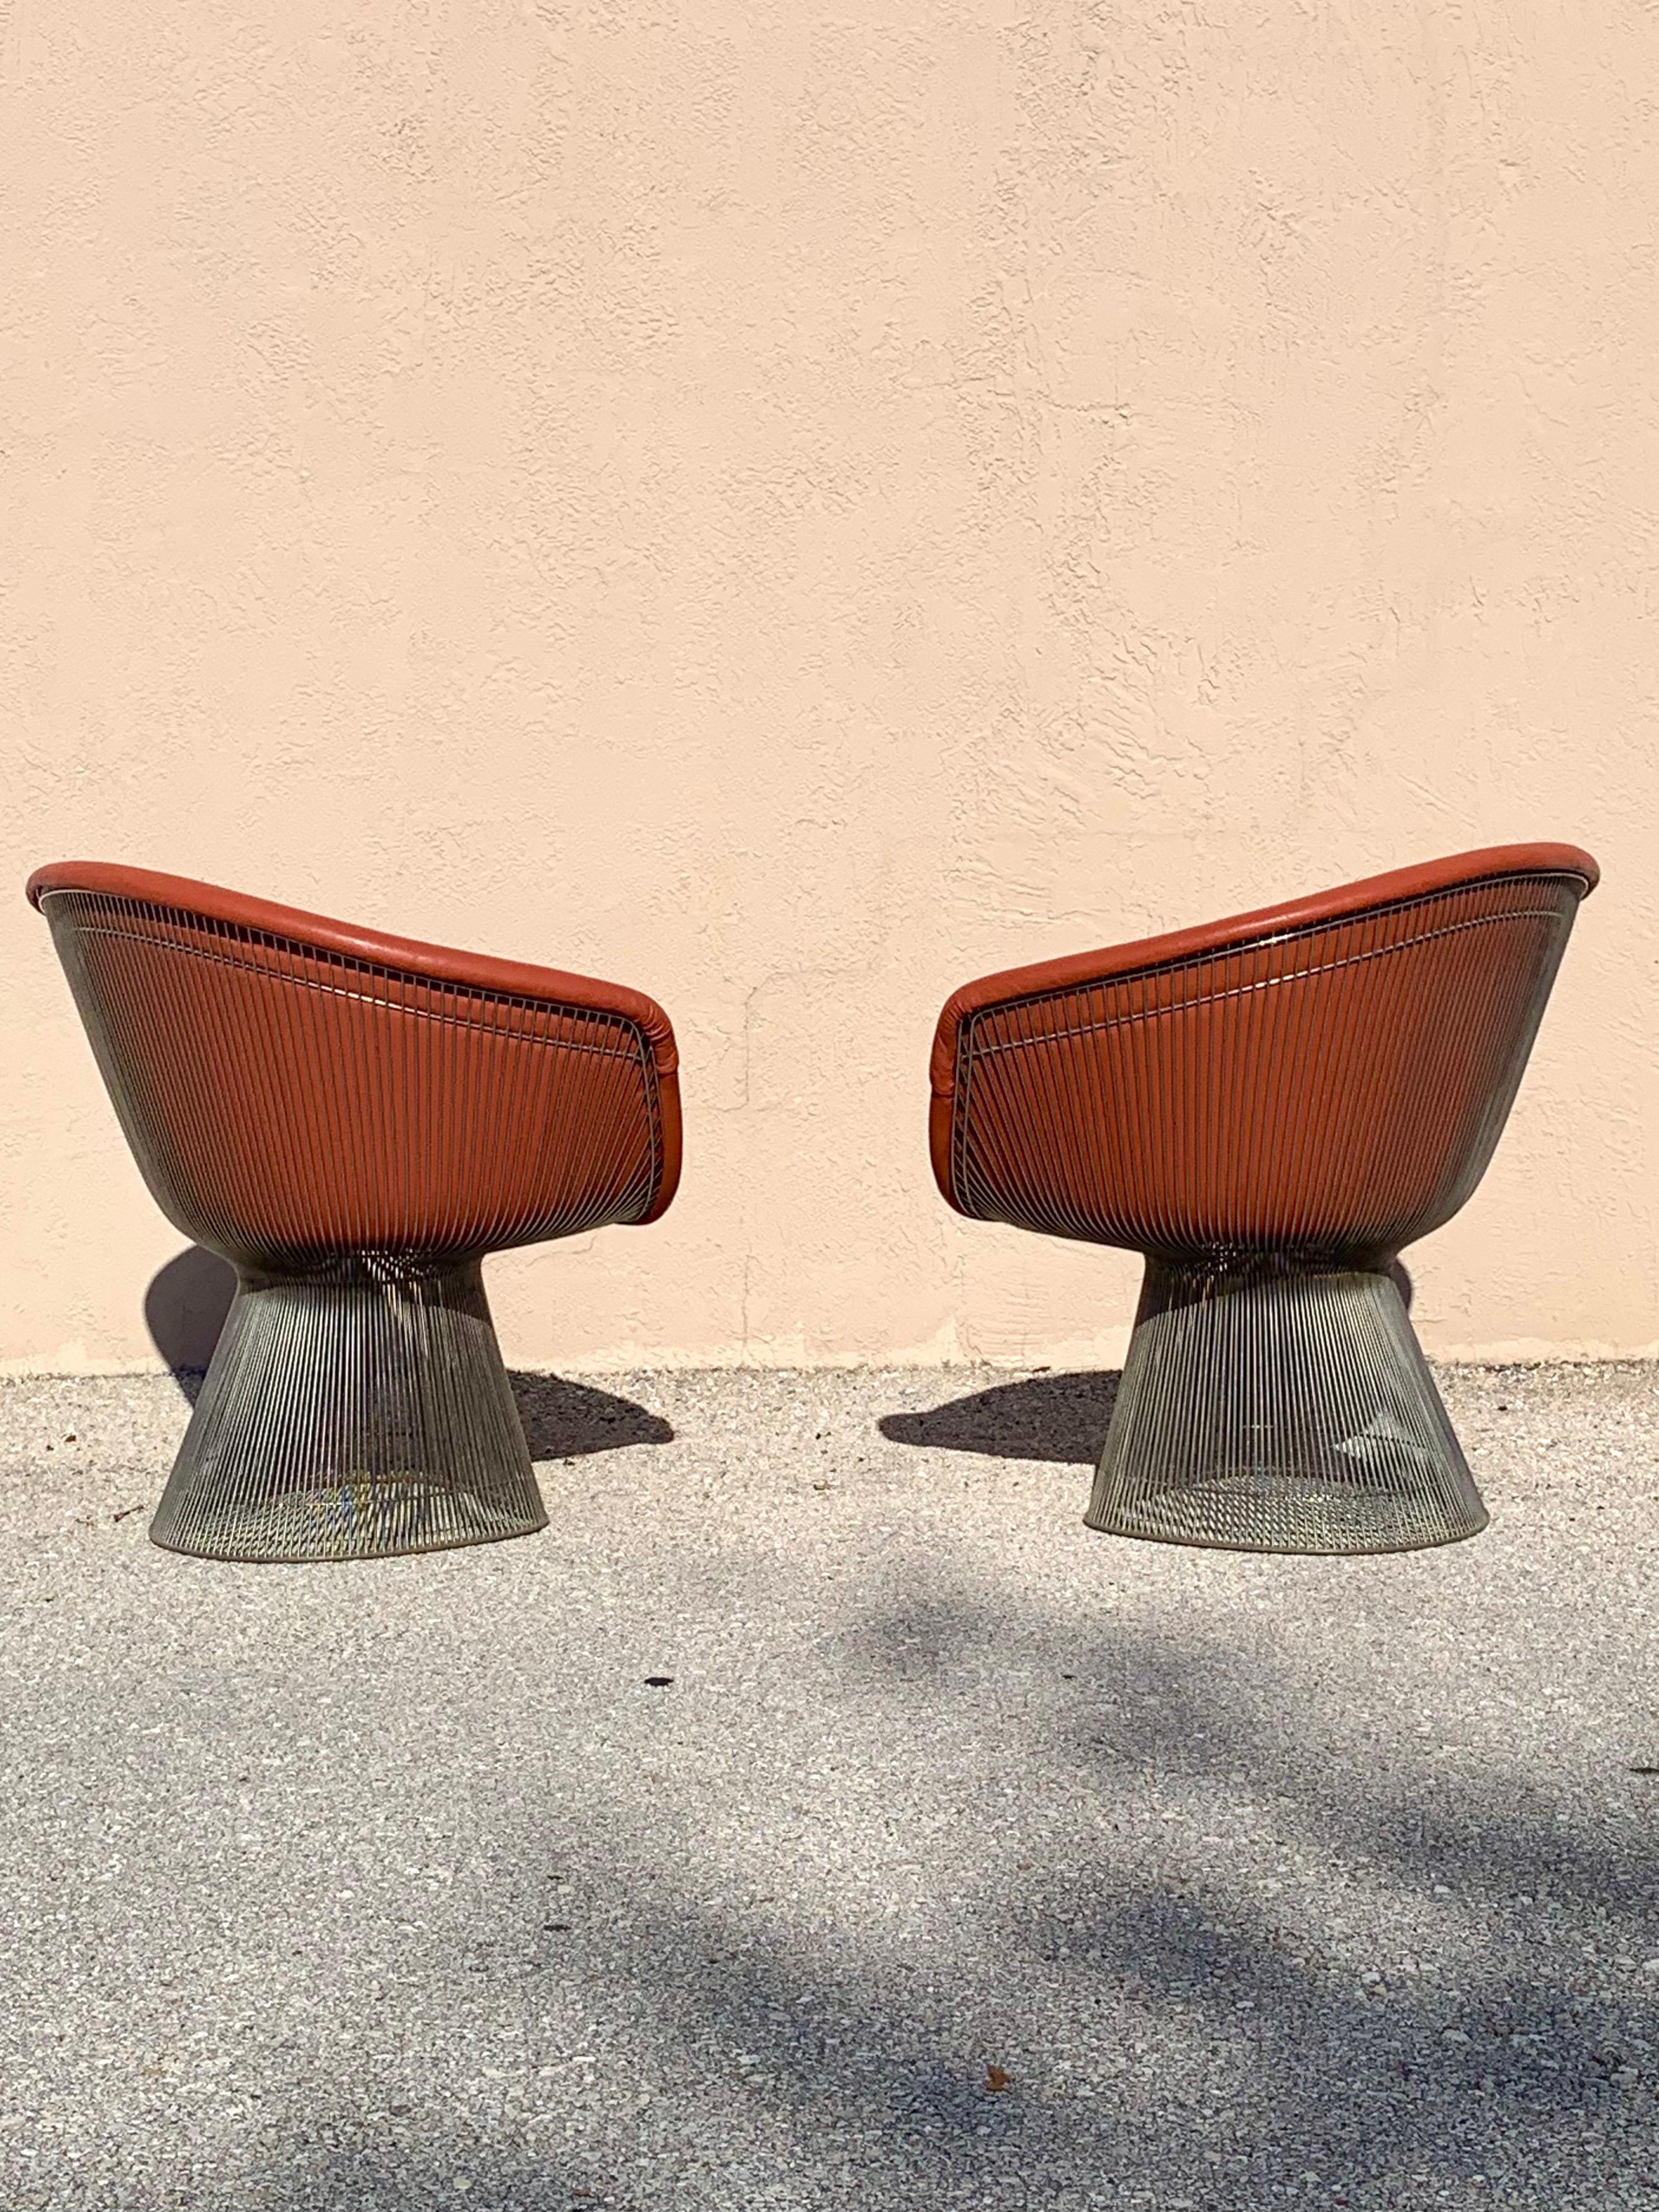 A pair of lounge chairs designed by Warren Platner for Knoll. Steel rod base finished in nickel. Upholstered in a burnt umber leather. Chairs were recovered from a South Florida estate where the owners had them upholstered in leather.